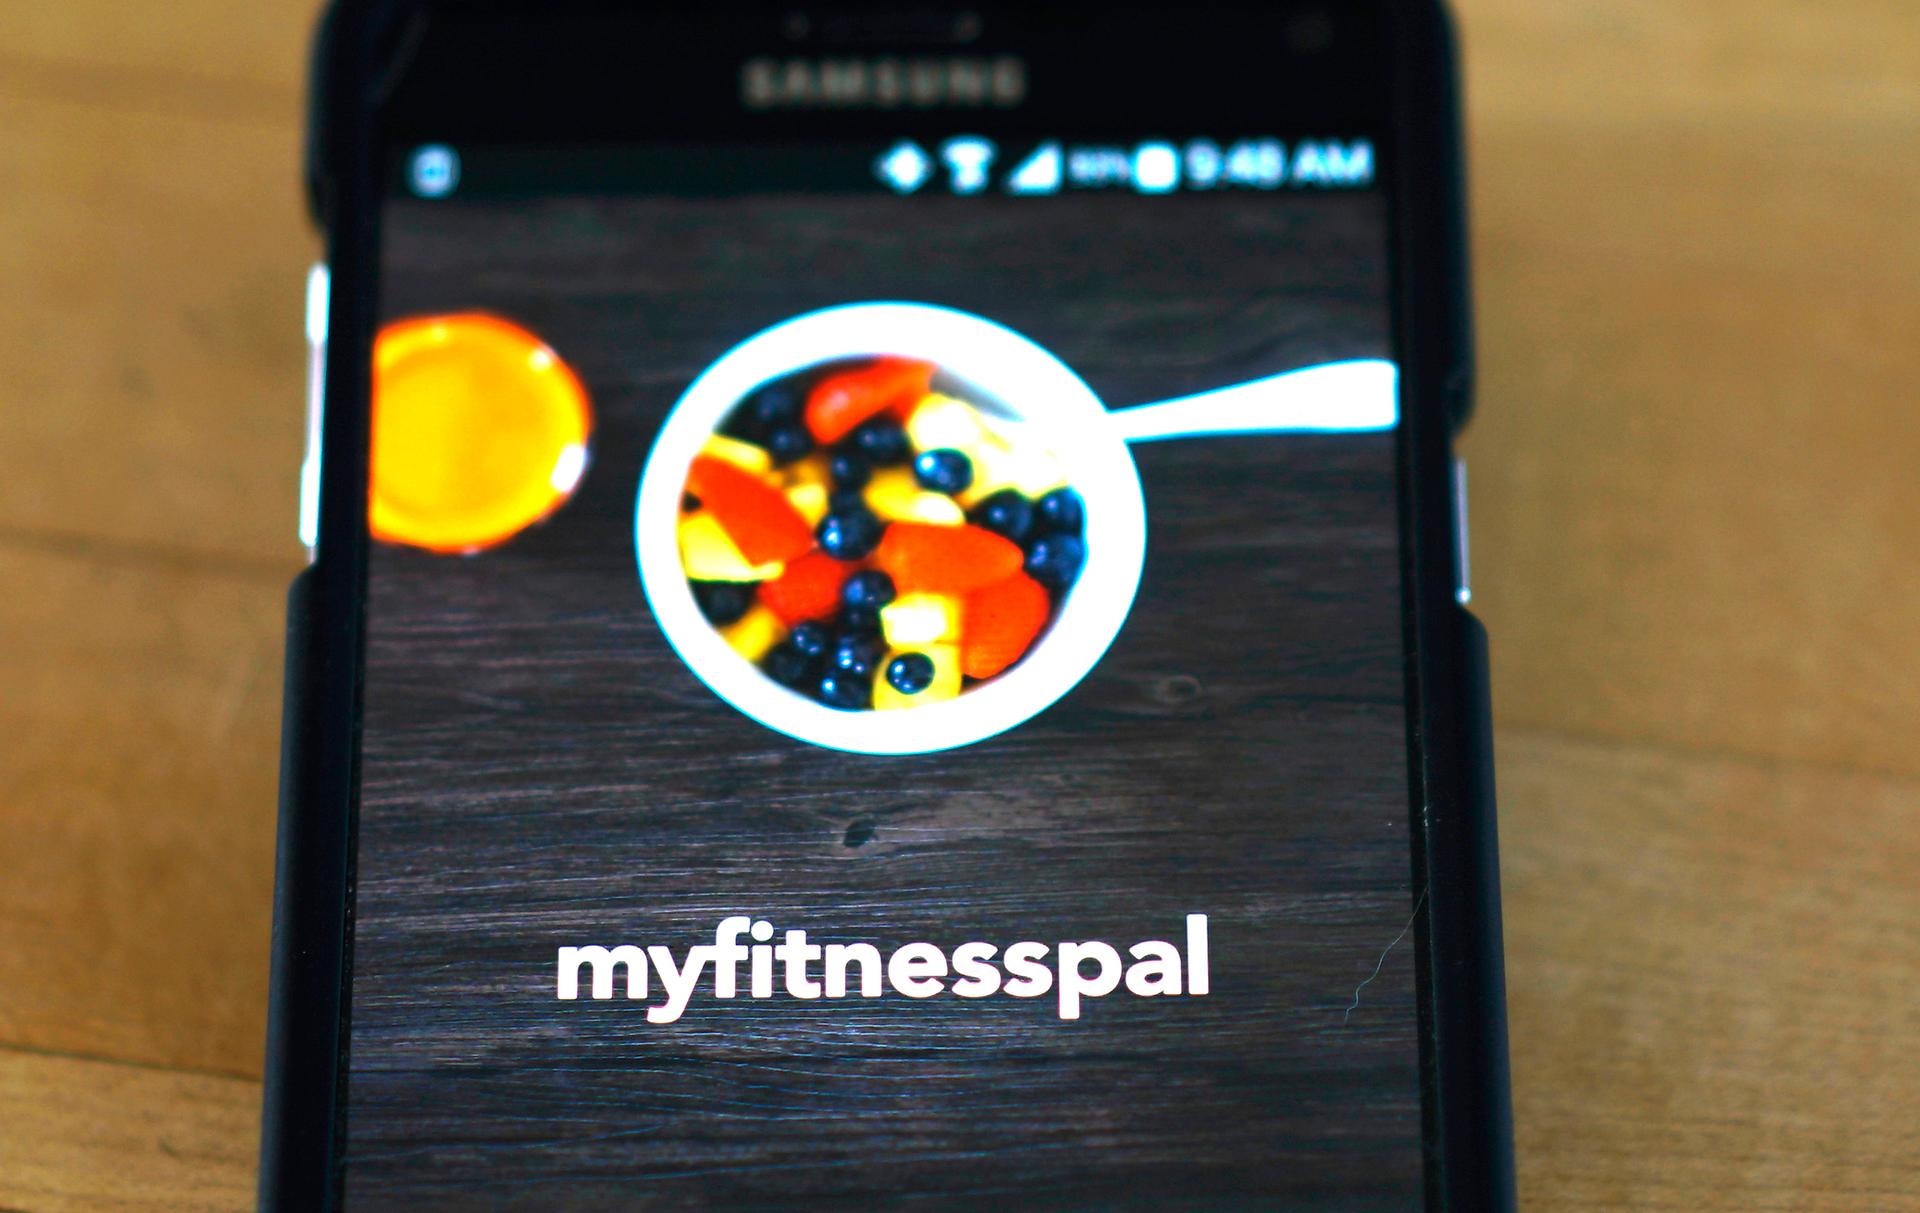 The MyFitnessPal app is seen on a smartphone in Golden, Colorado. Athletic clothing company Under Armour said it would pay $475 million for MyFitnessPal, a free app for tracking food habits and caloric intake.